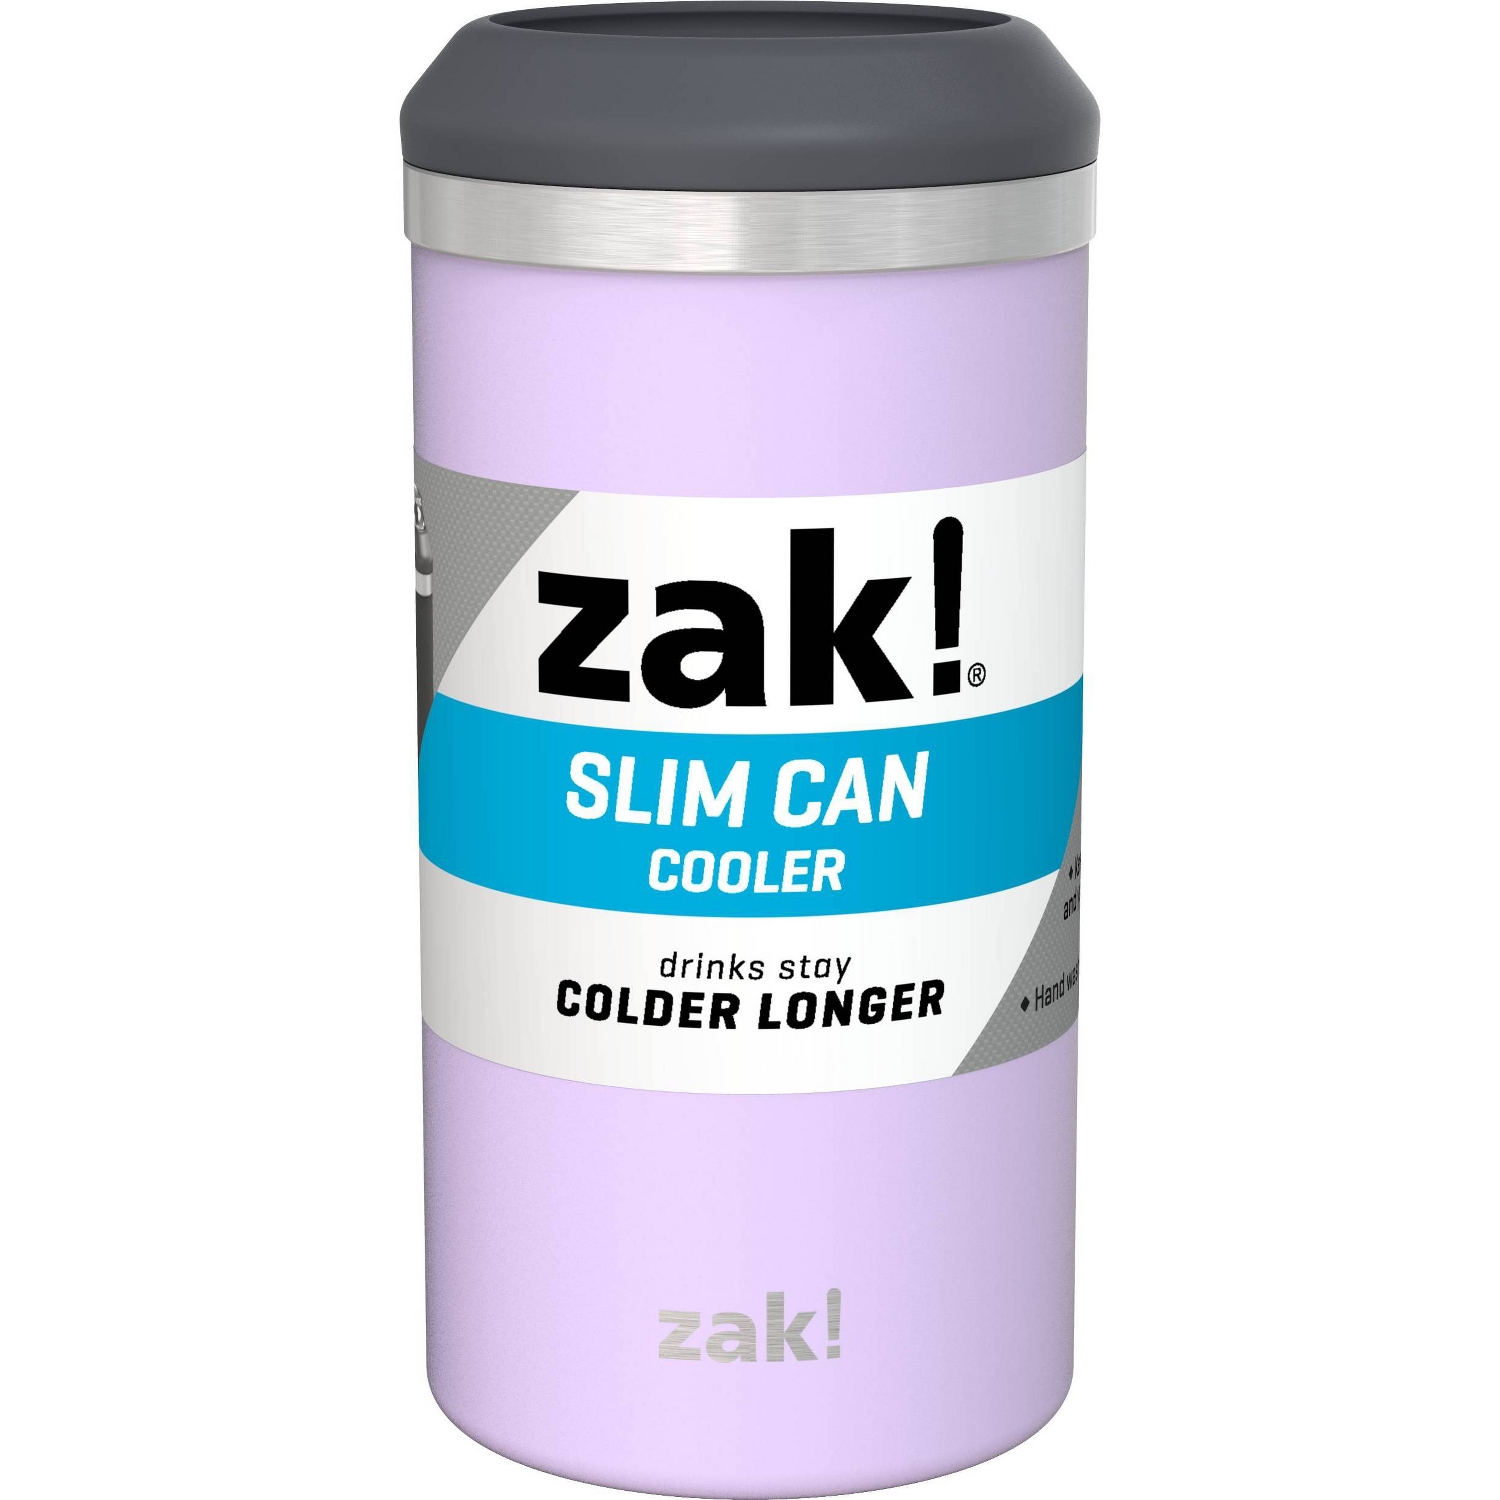 12.5-Oz Zak! Designs Stainless Steel Slim or Standard Can Cooler (various colors) $5 + Free Store Pickup at Target or F/S on $35+